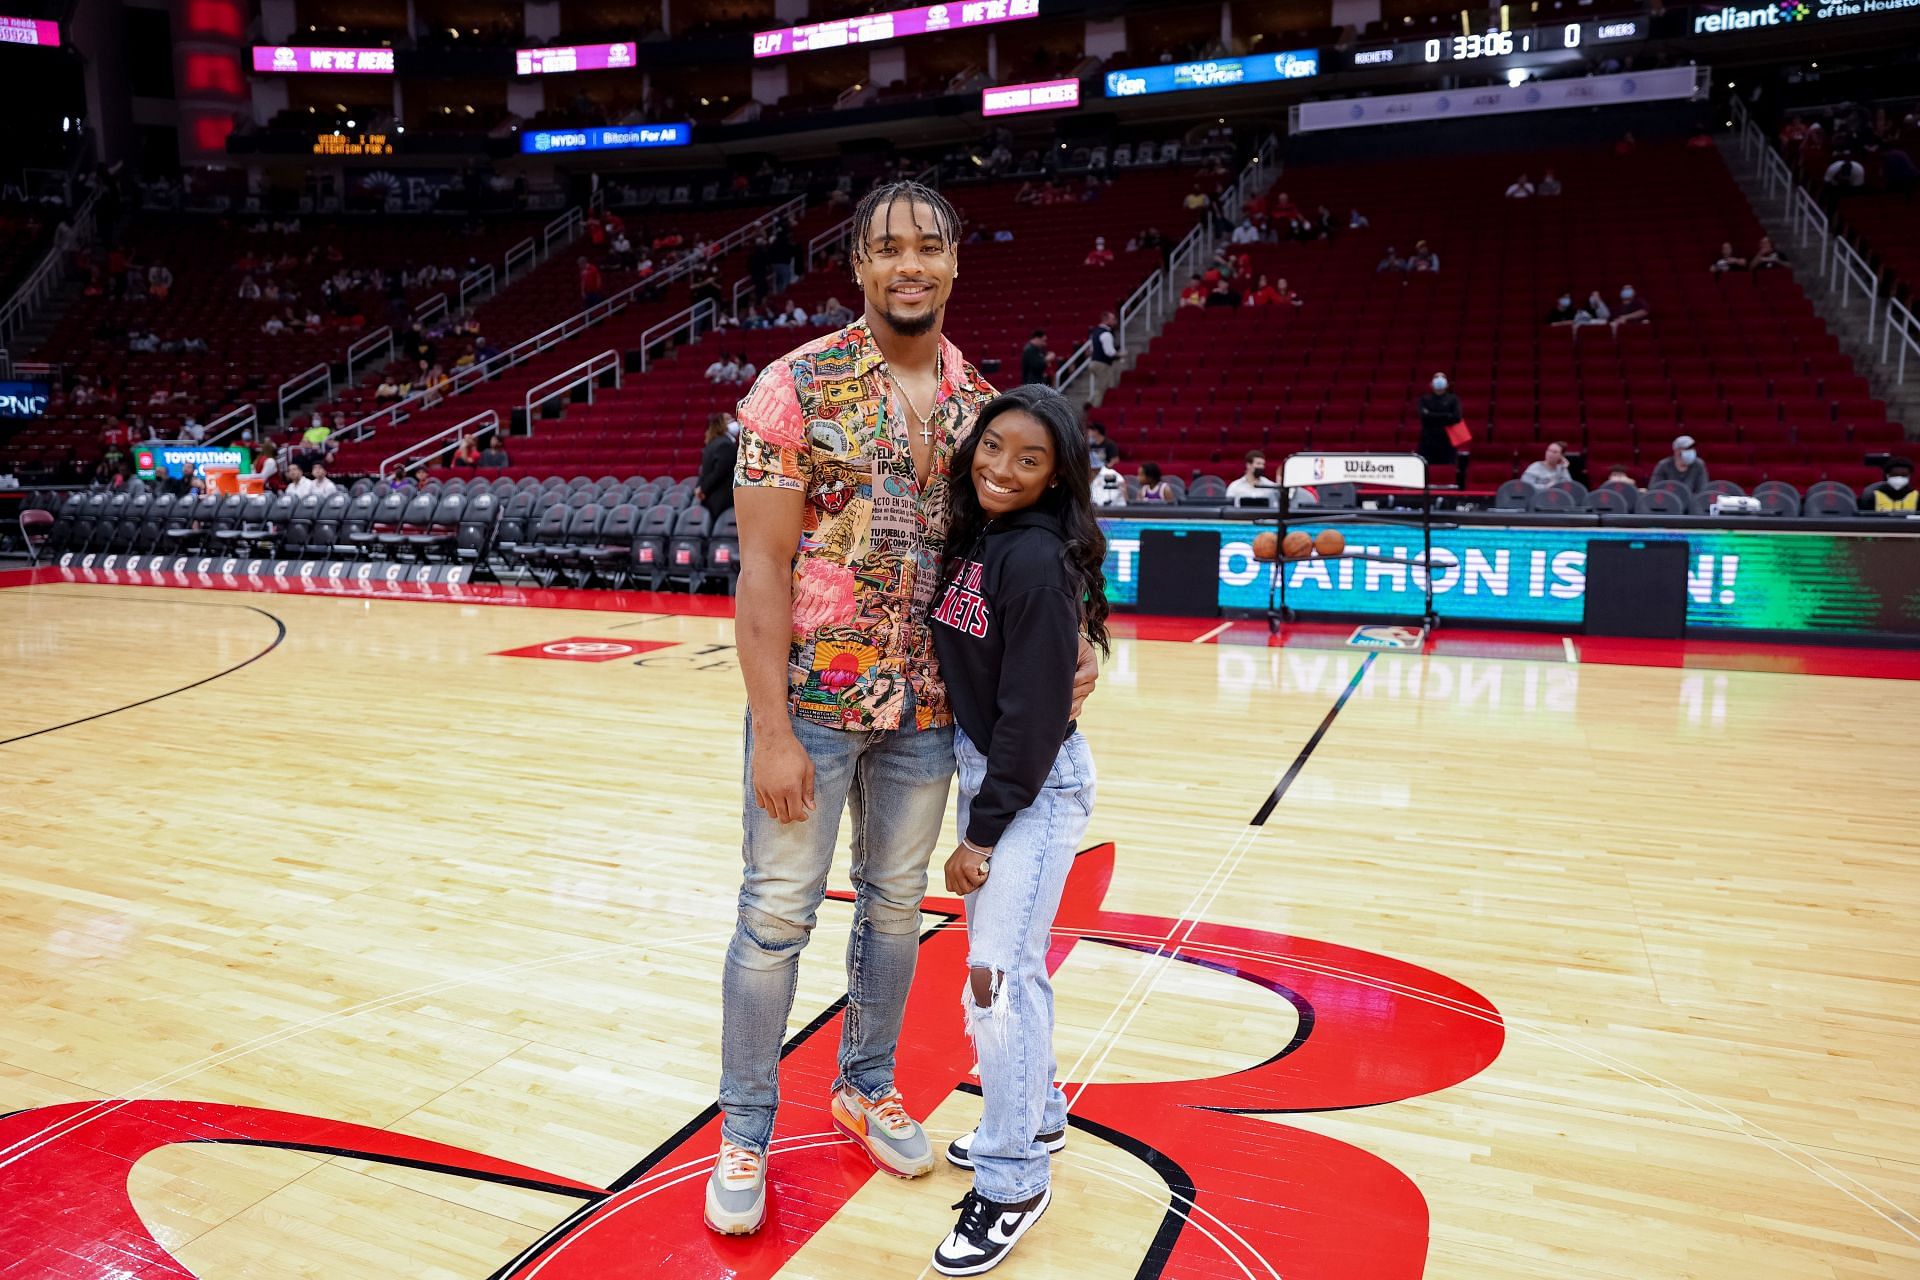 Jonathan Owens poses with partner Simona Biles during a Houston Rockets game